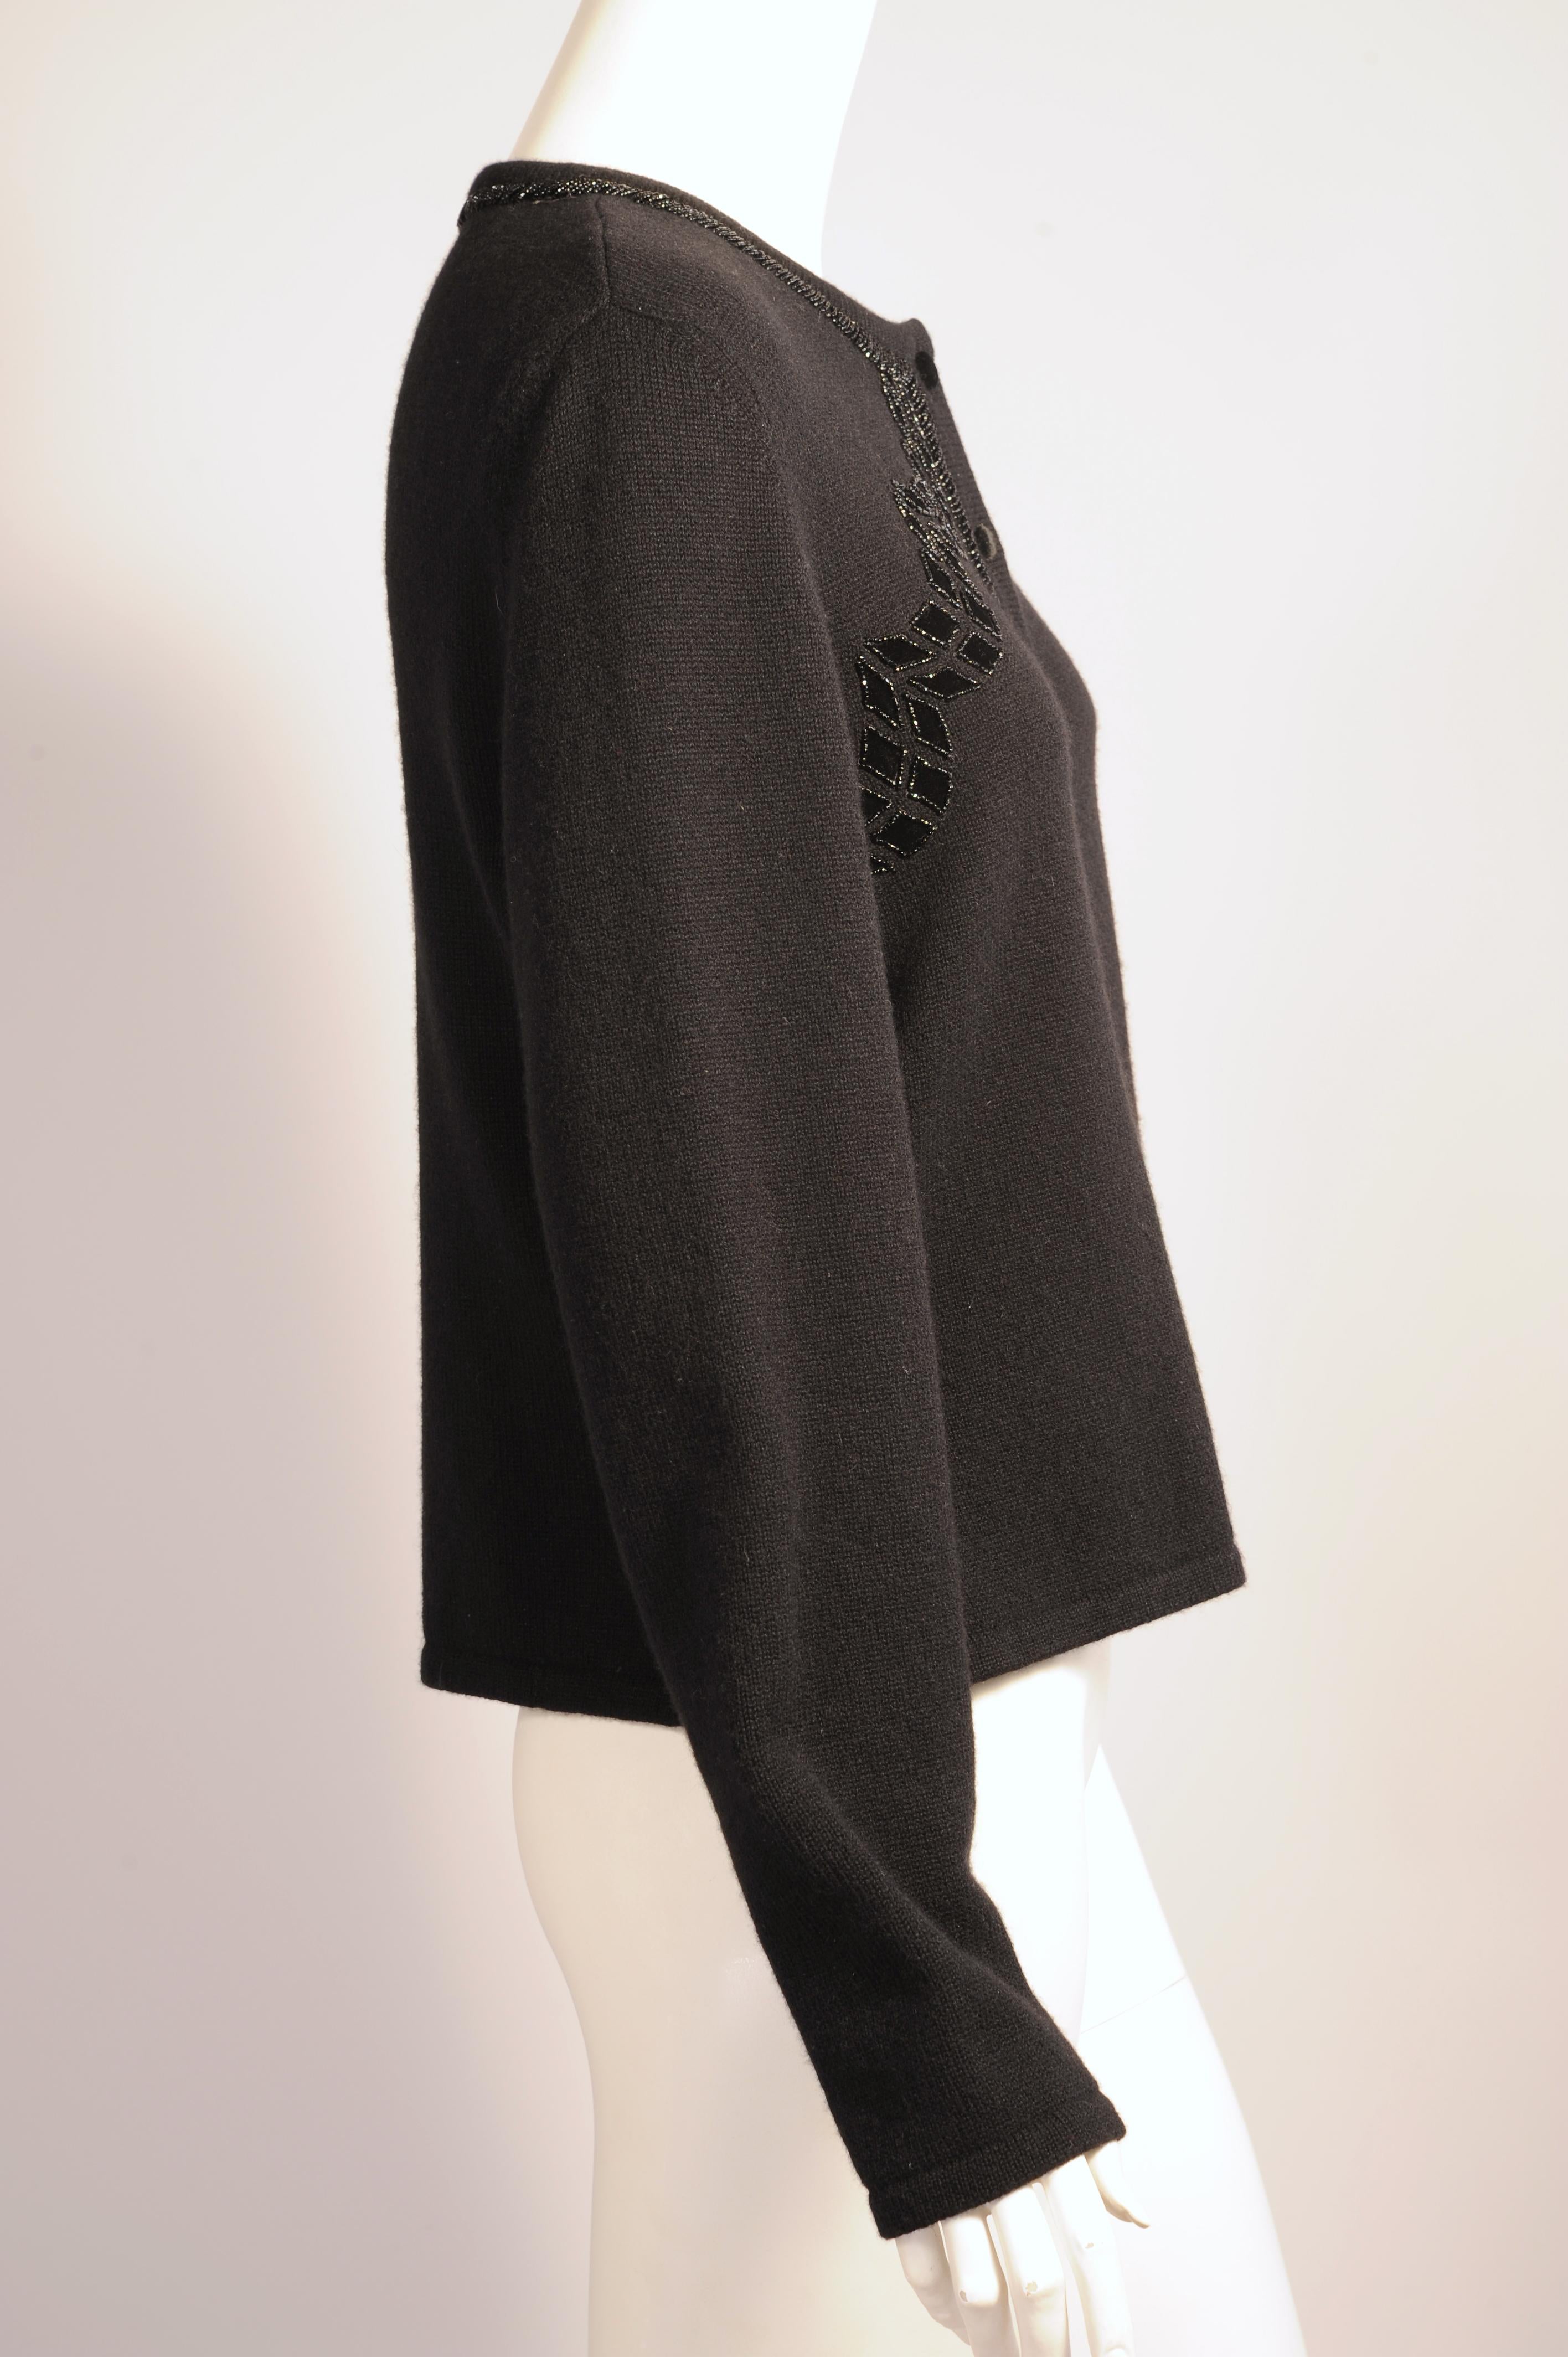 Italian cashmere in a classic cardigan style is elevated to evening wear by Carolina Herrera. The neckline and front opening are edged with diagonal rows of black caviar beads surrounding the black velvet buttons. There is a scalloped pattern of